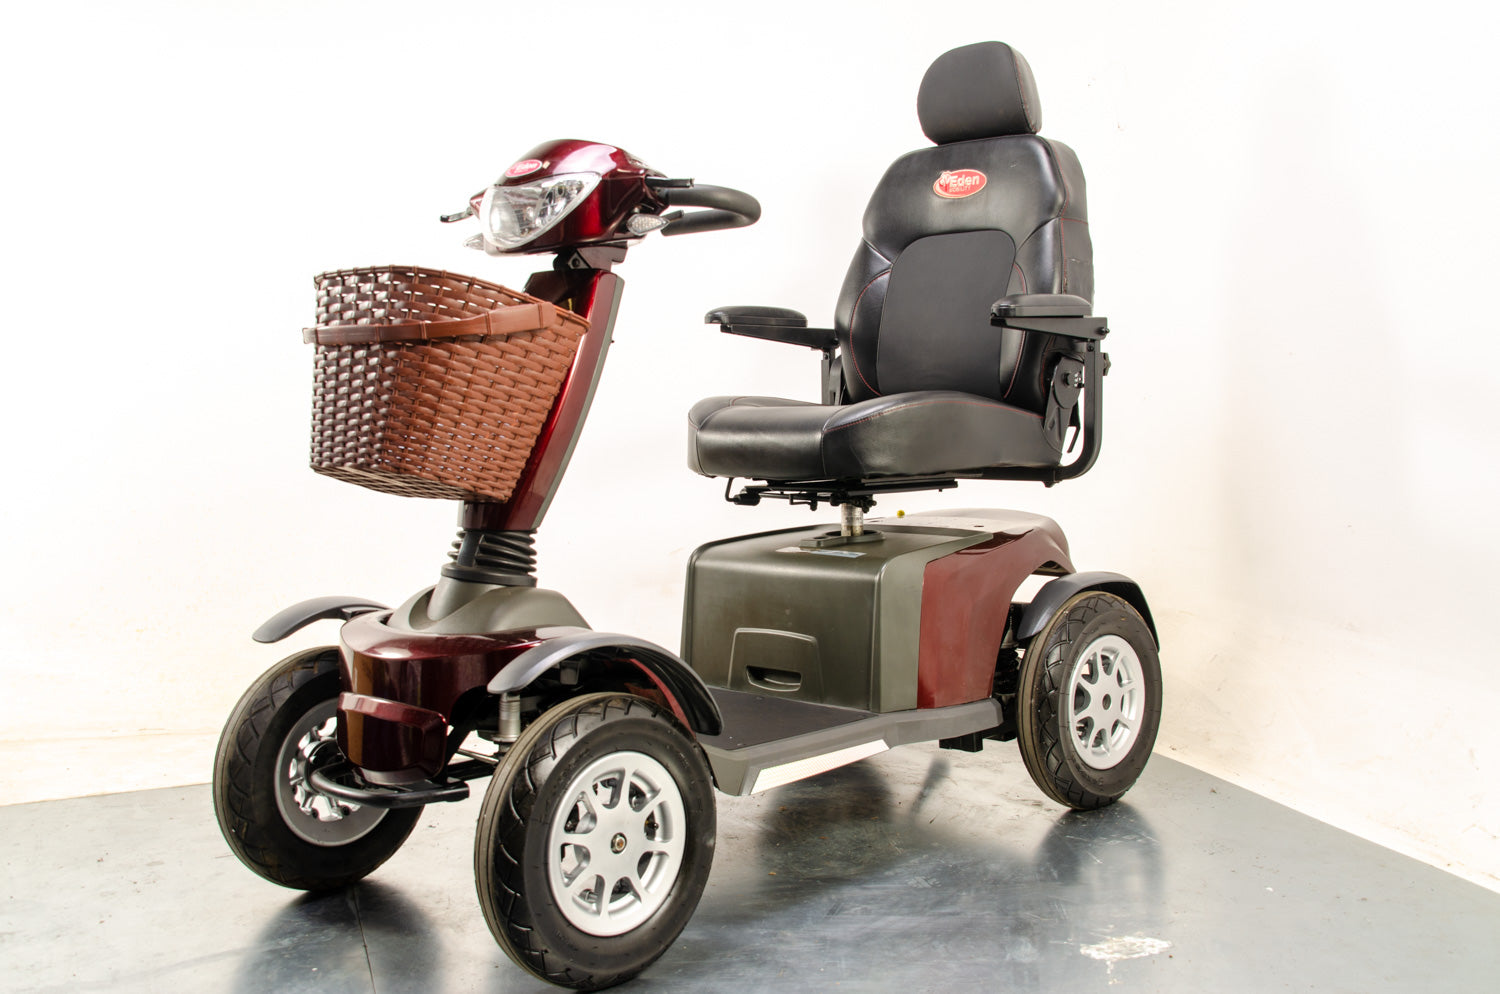 Eden Roadmaster Galaxy II All-Terrain Off-Road Used Mobility Scooter 8mph Luxury Electric Large  13641 (Copy)